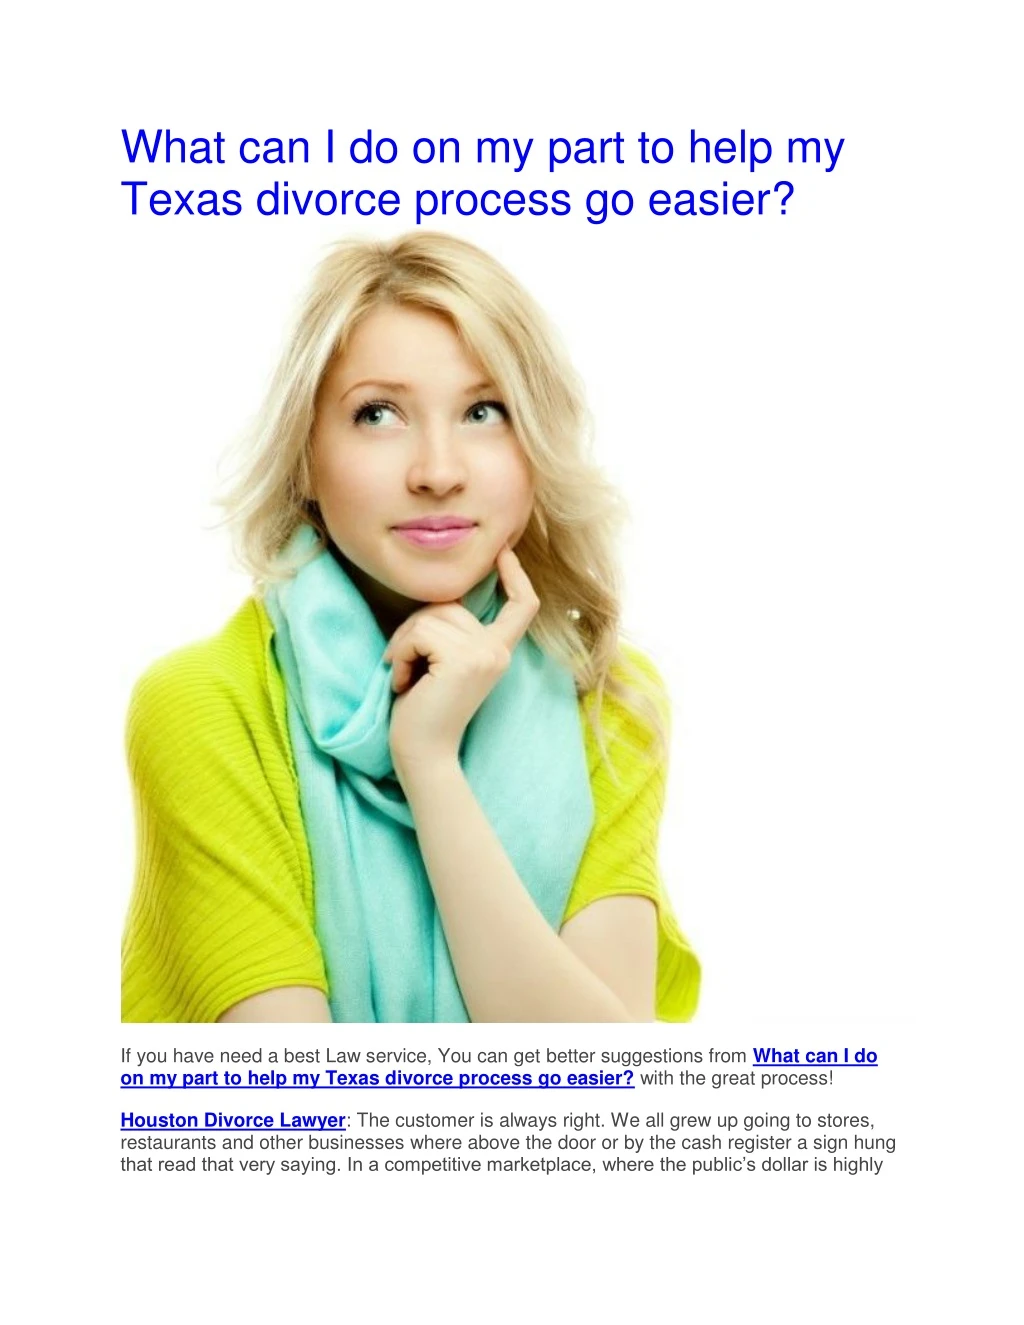 what can i do on my part to help my texas divorce